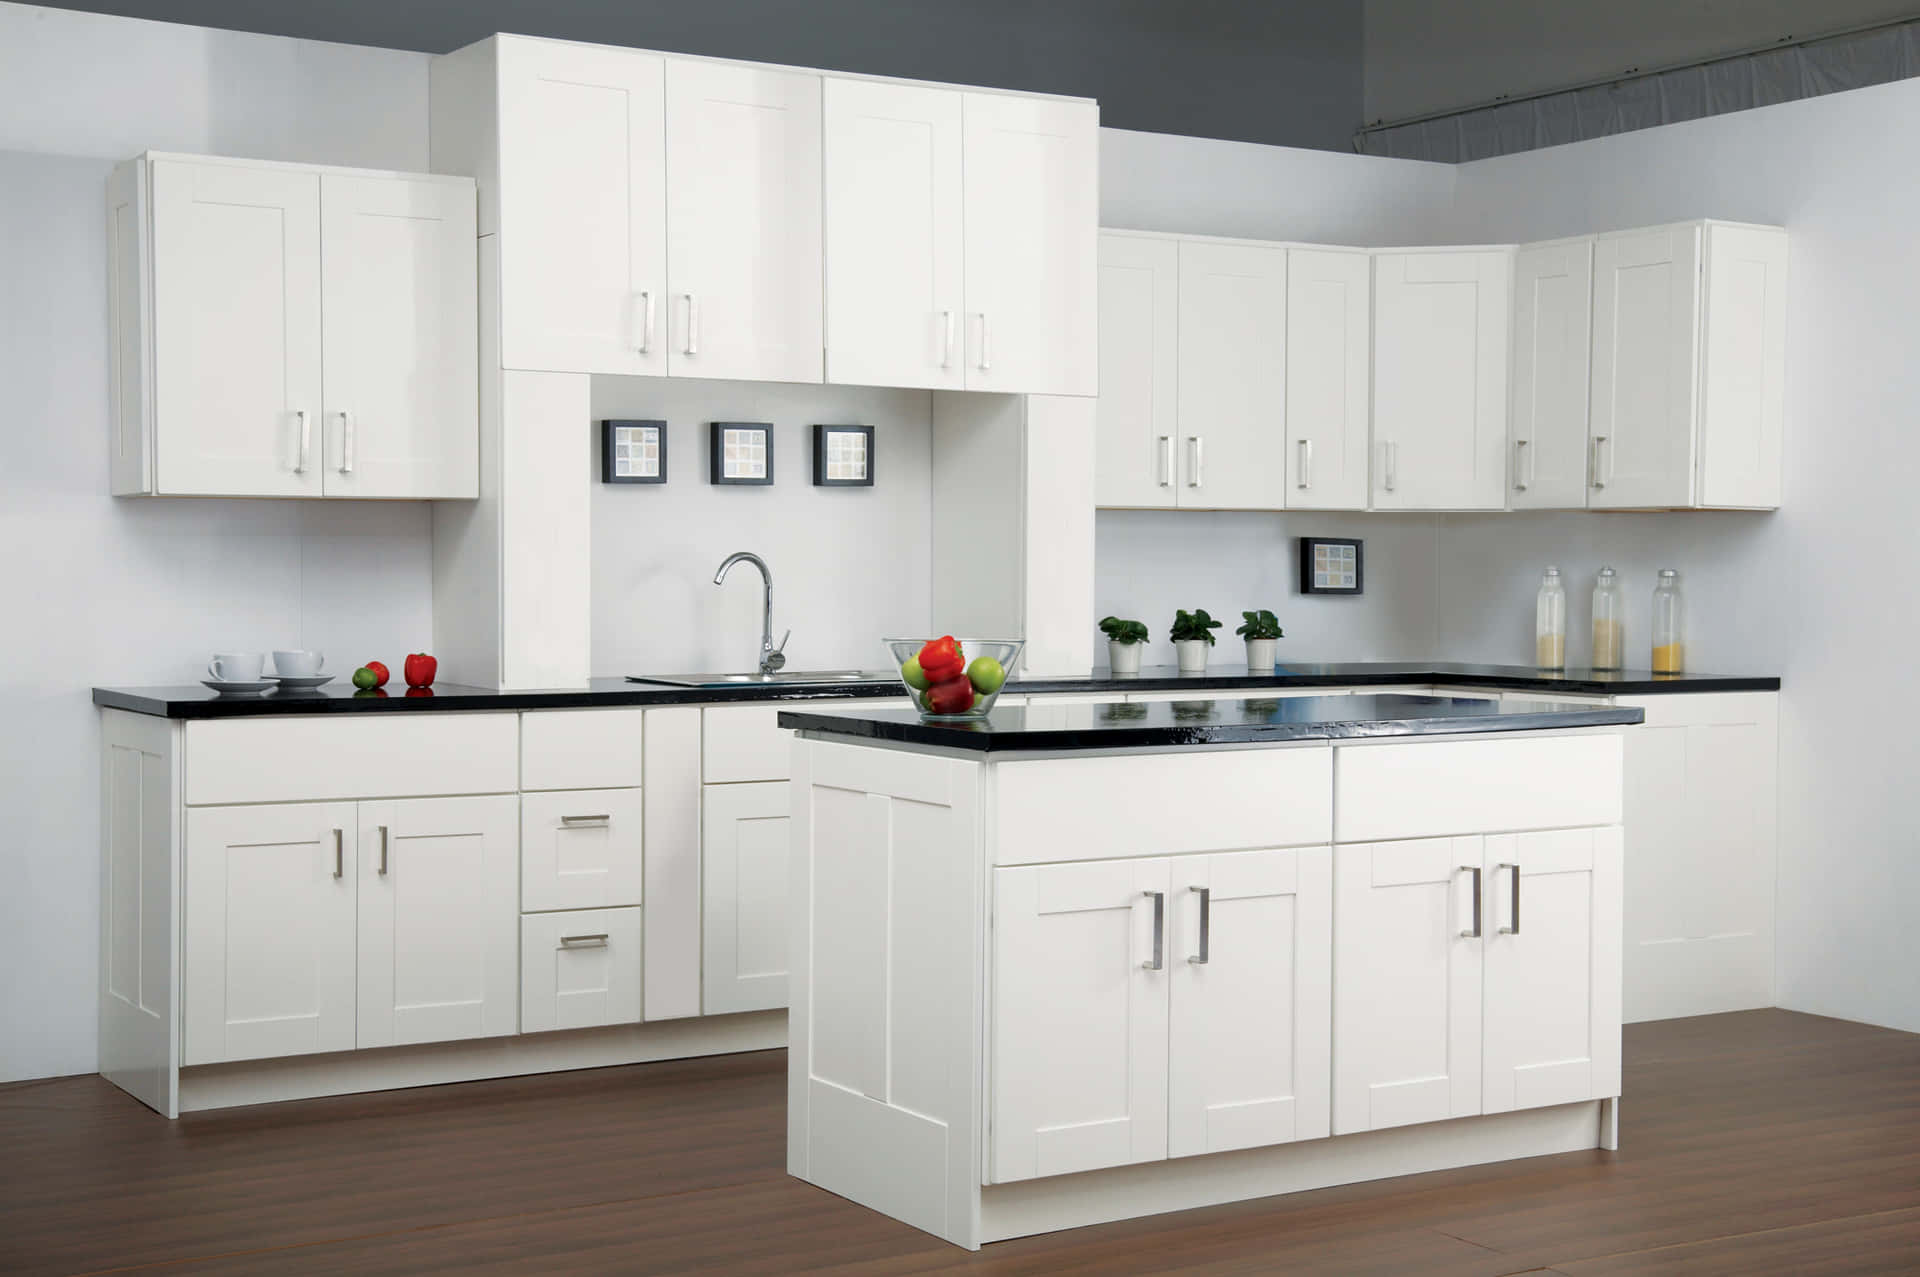 Experience the Quality of Quality Cabinets